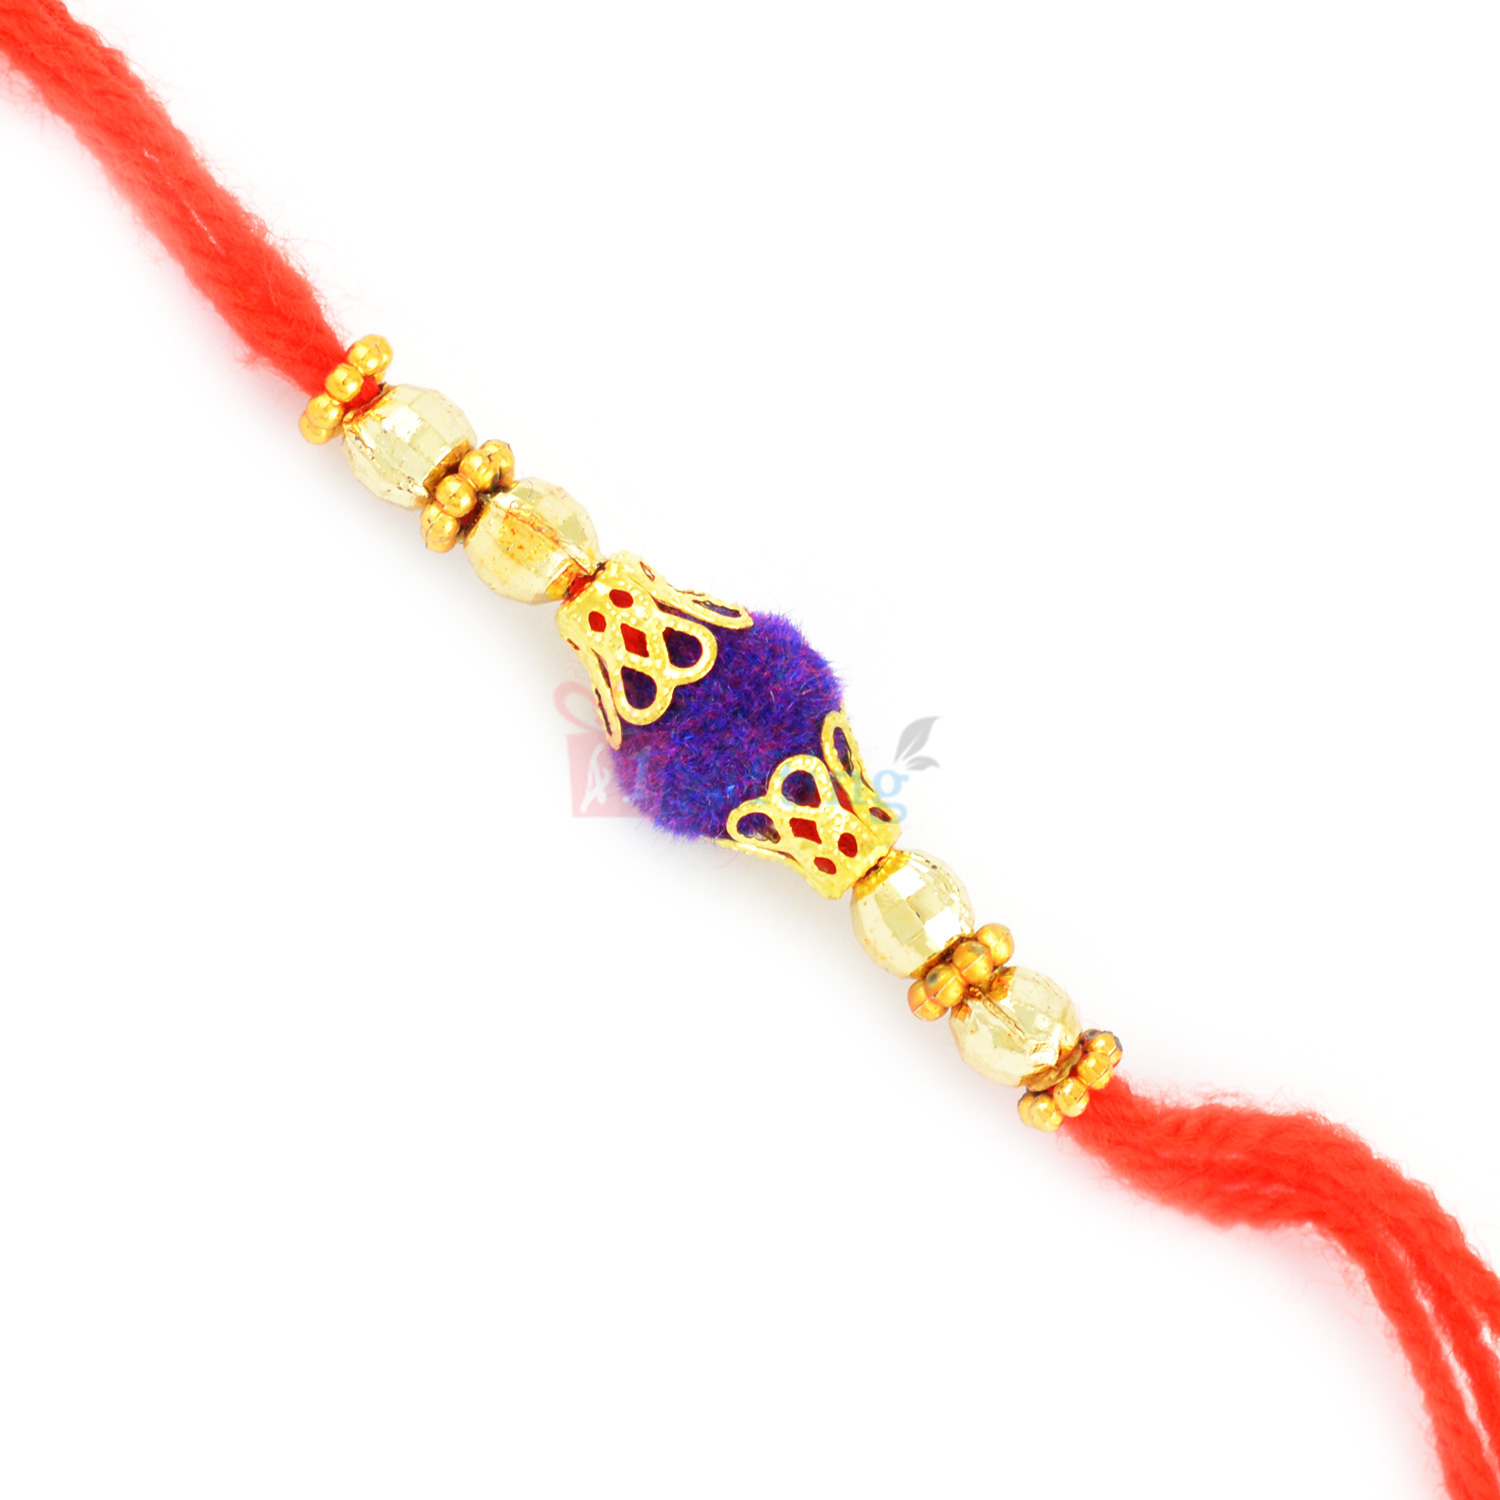 Simply Central Soft Ball with Golden Beads Rakhi Thread